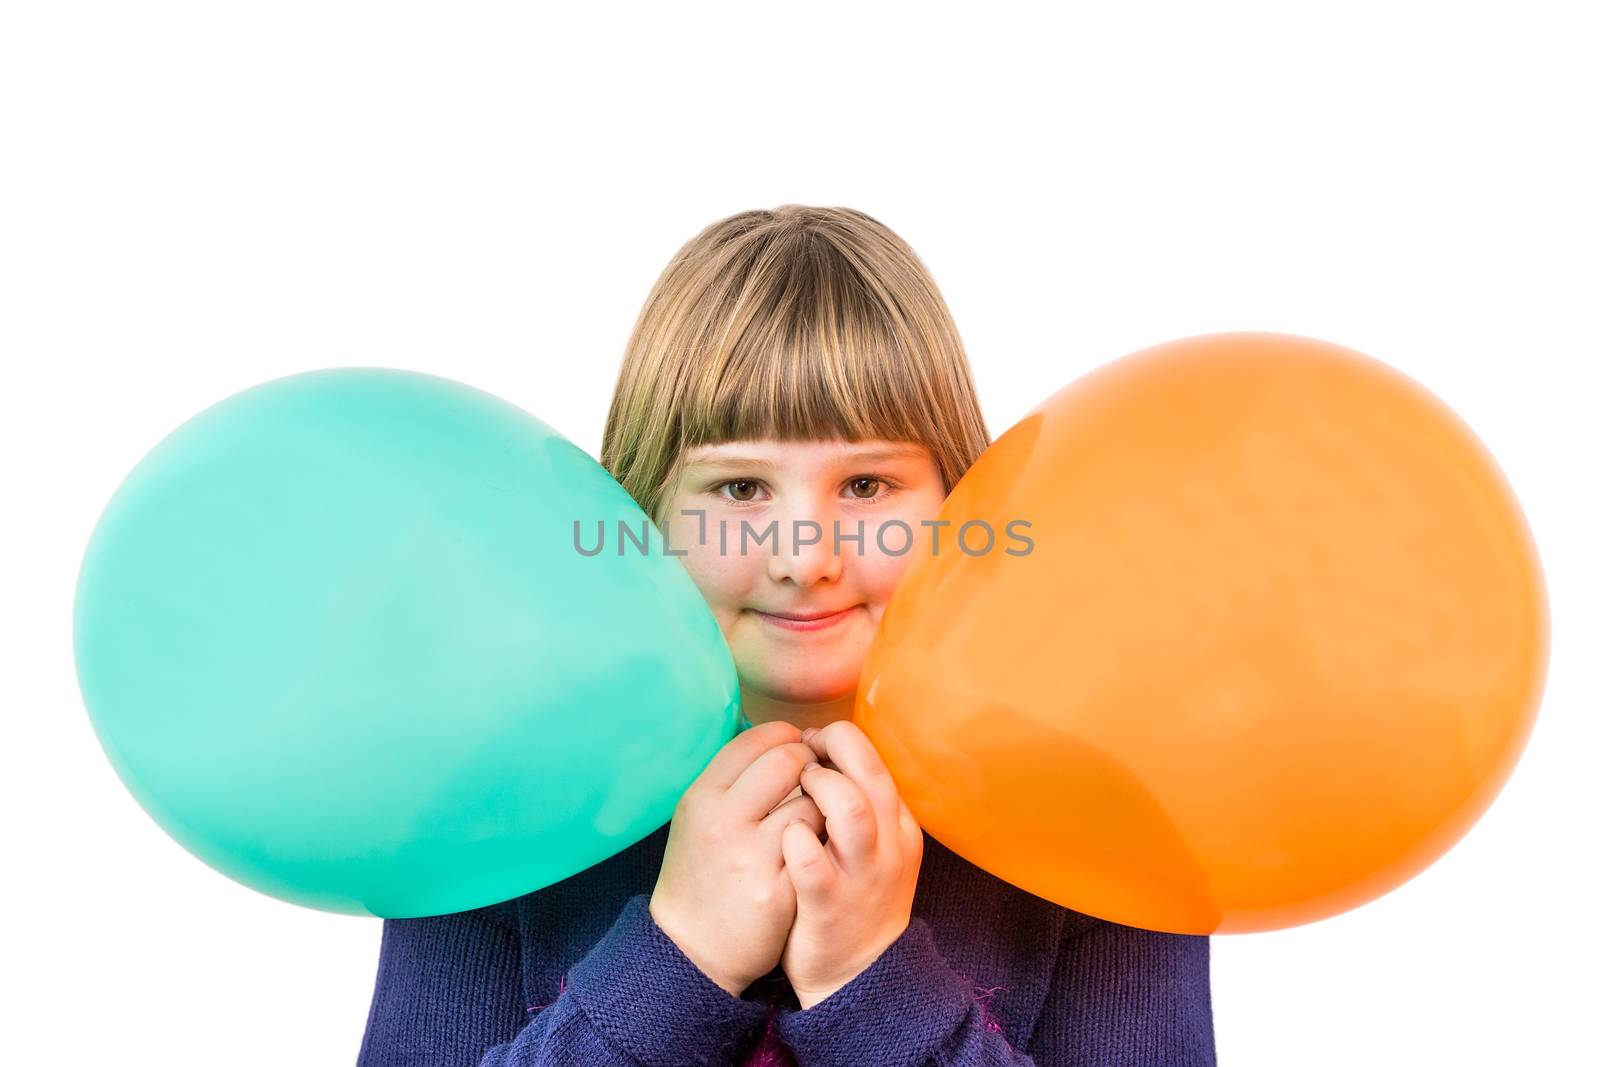 Young dutch girl holding two colorful balloons by BenSchonewille